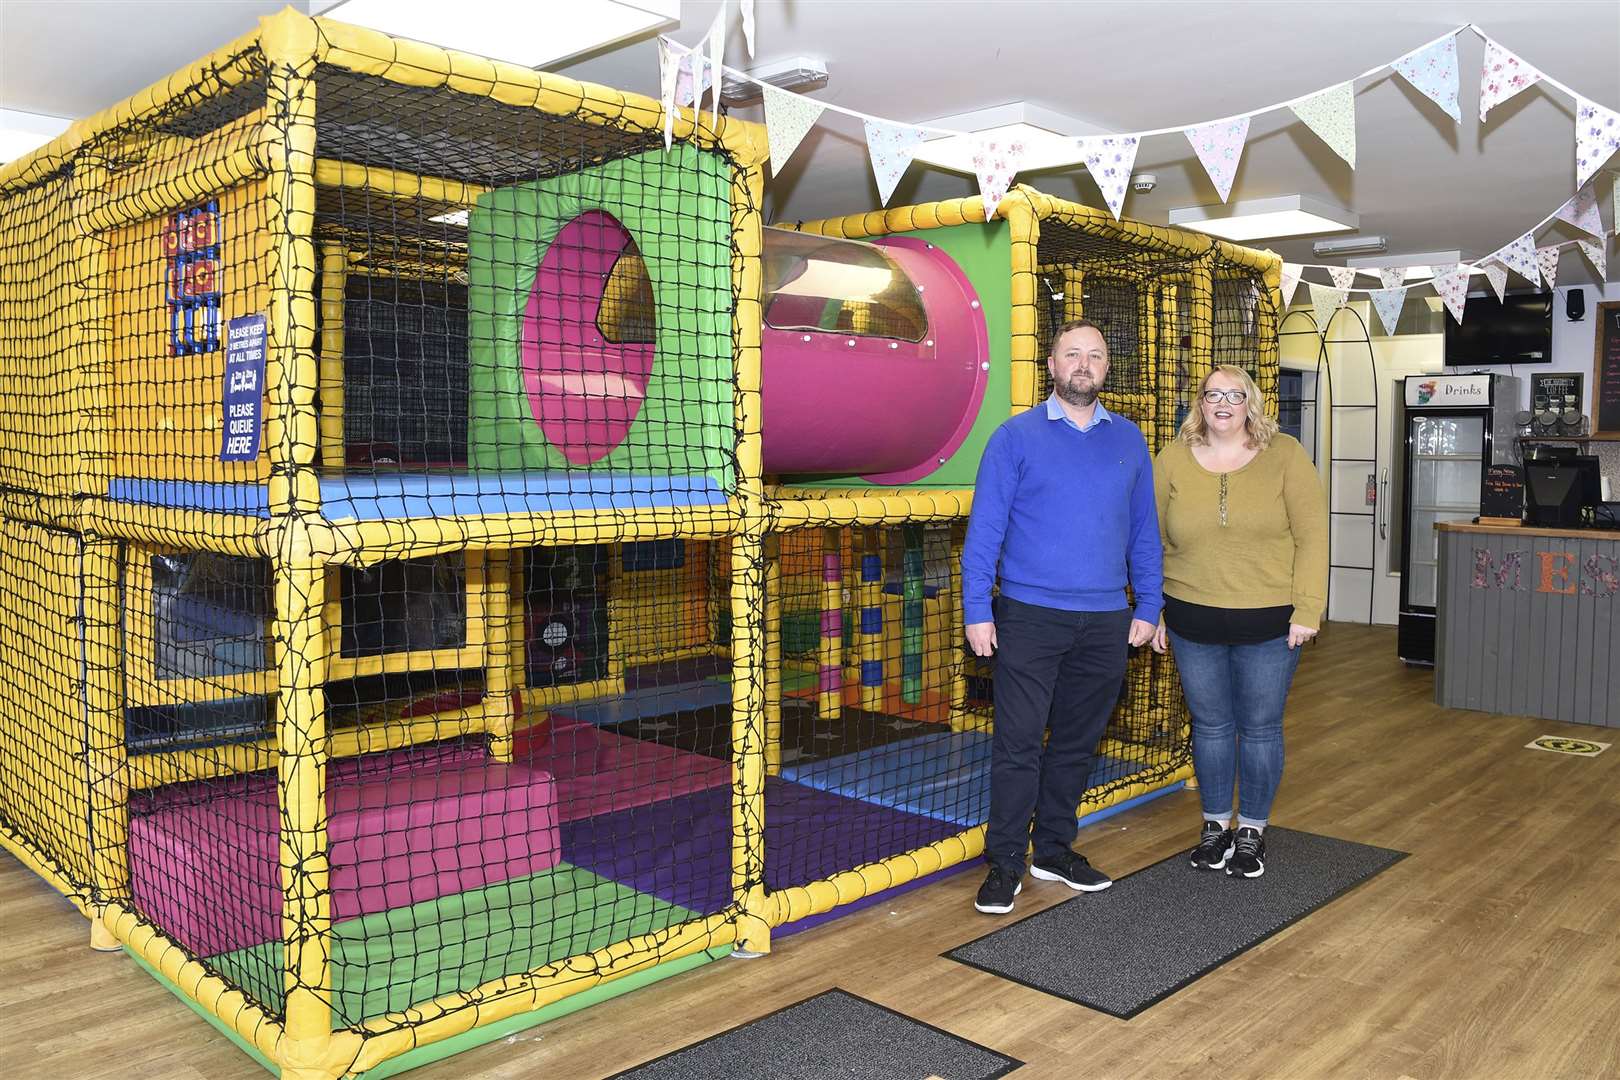 Ian and Fiona Carlisle at Messy Nessy in Rotterdam Street, Thurso. They say they have 'completely struggled' over the past year but are grateful for the support they have received from the community. Picture: Mel Roger